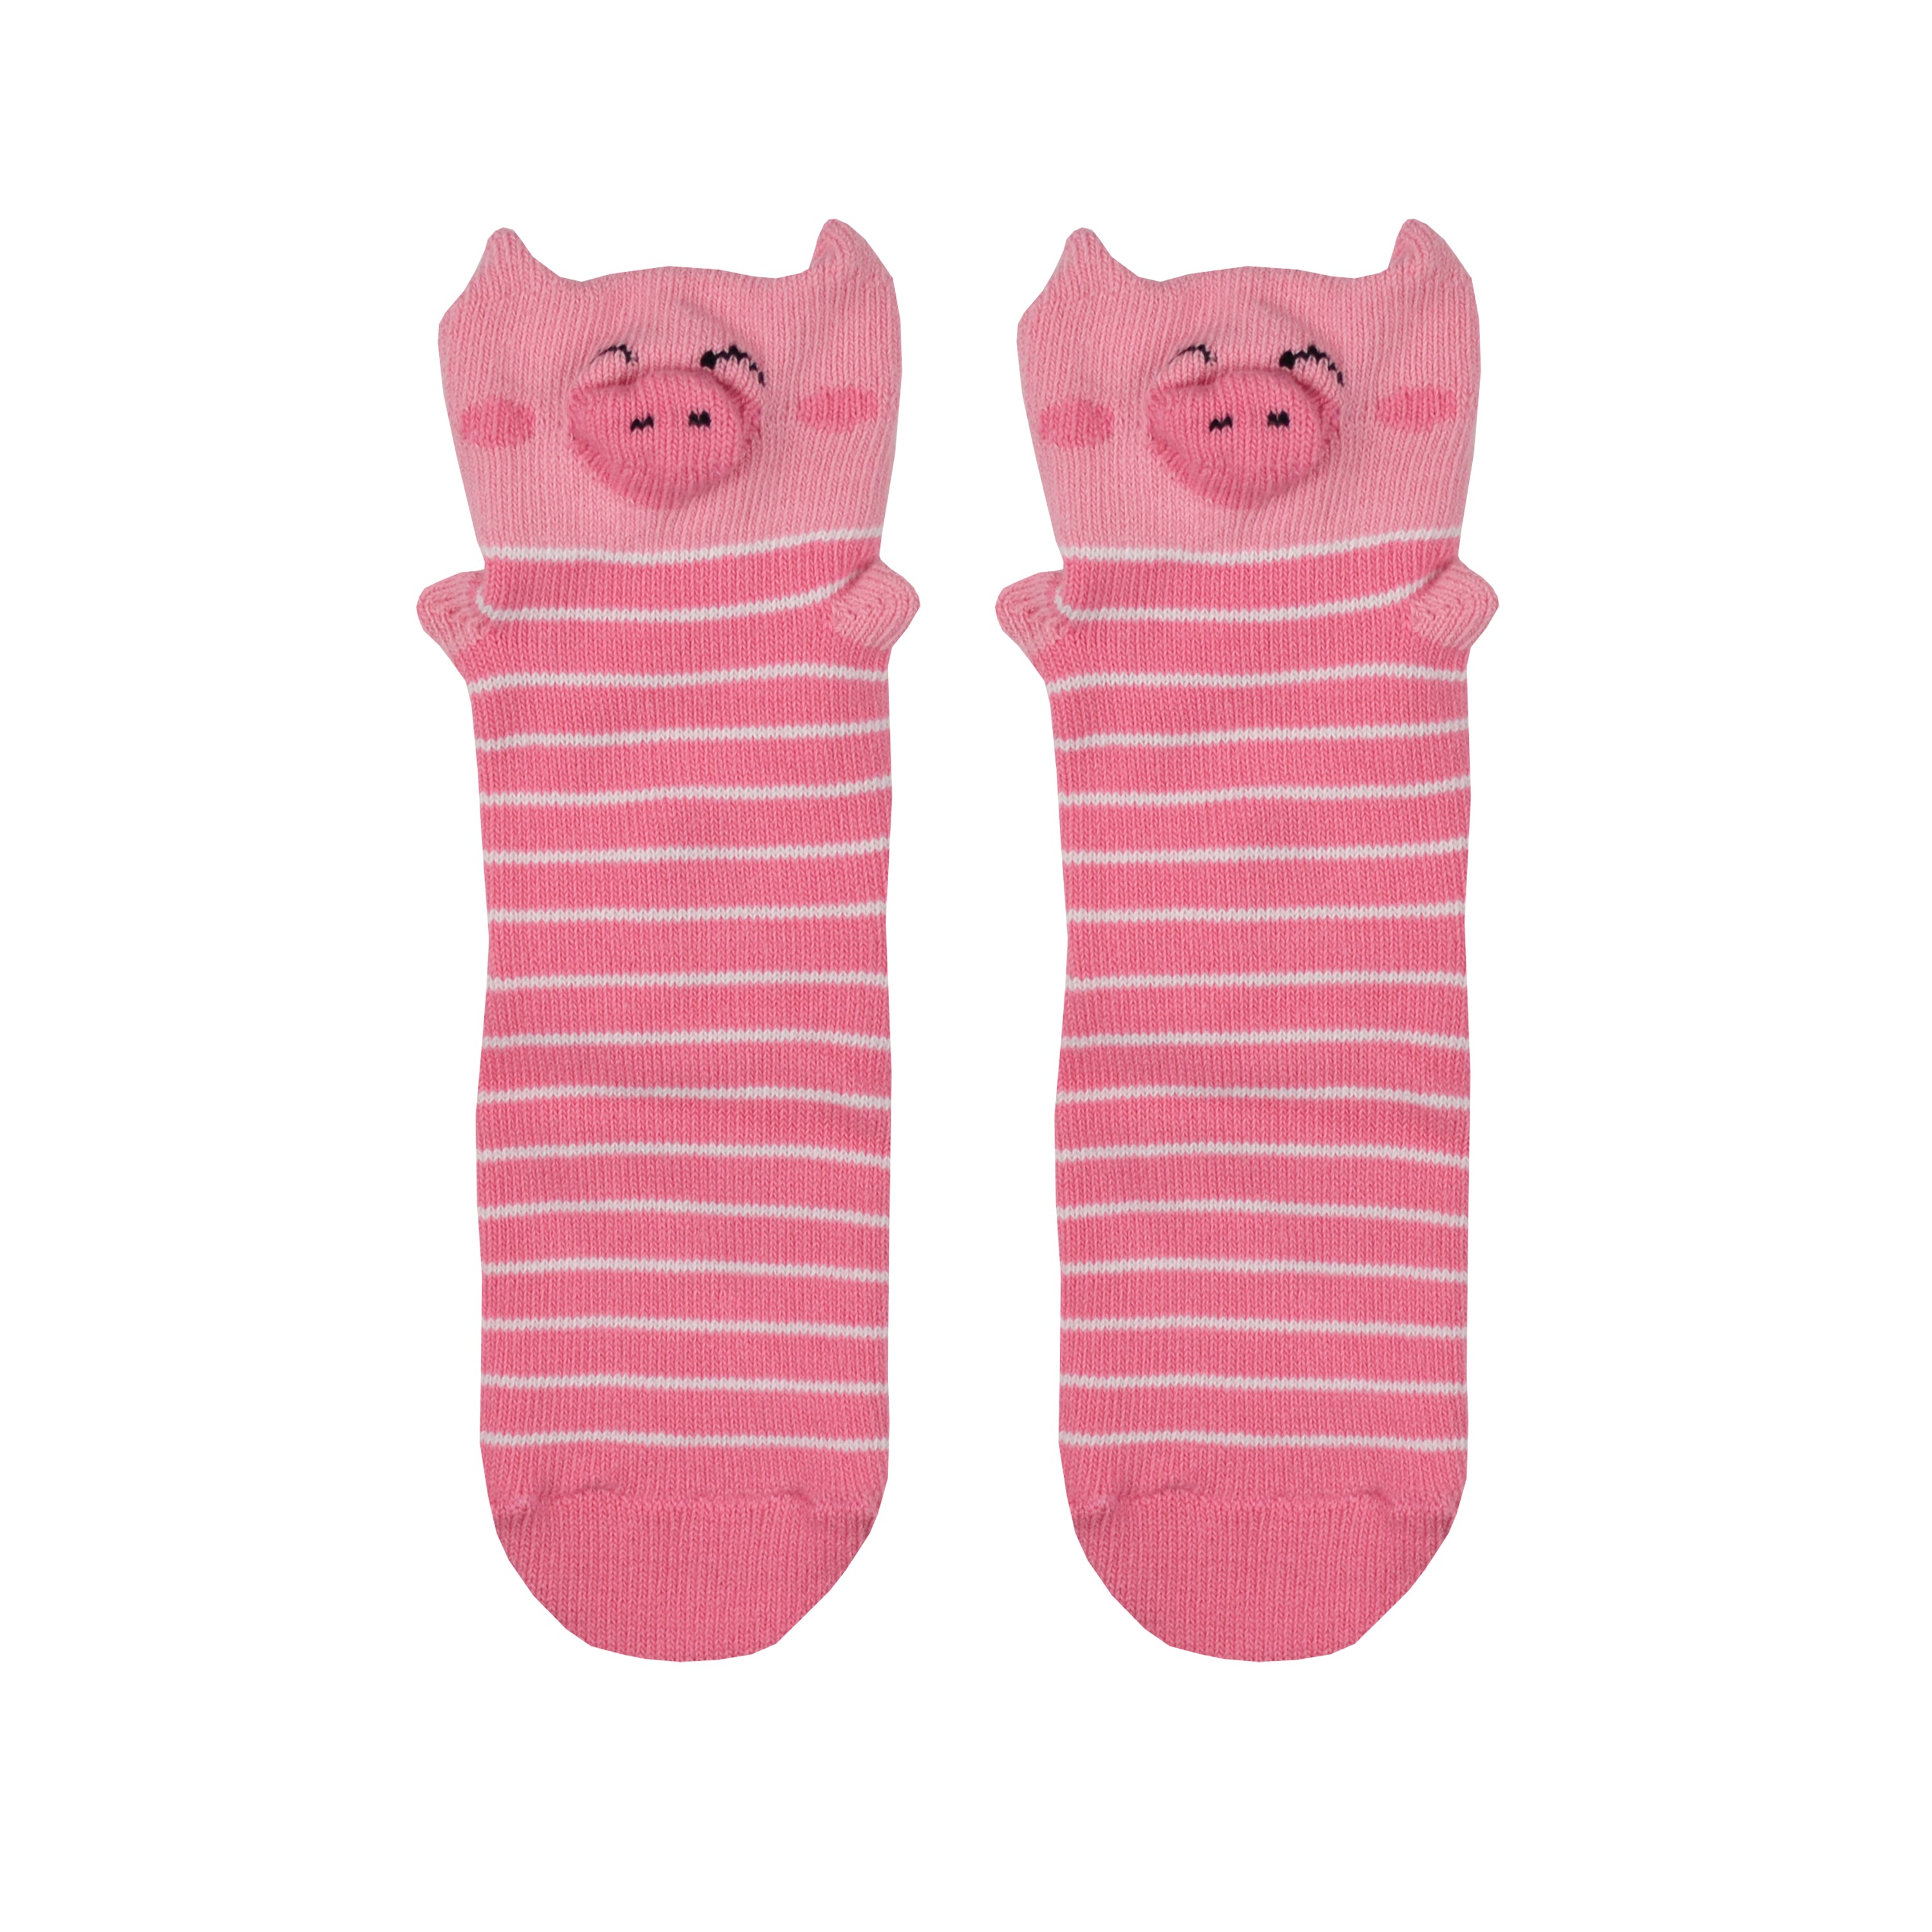 Shown in a flatlay, a pair of kids Foot Traffic cotton pig socks. These are pink with white stripes and feature 3D pig ears, arms, and snoot.